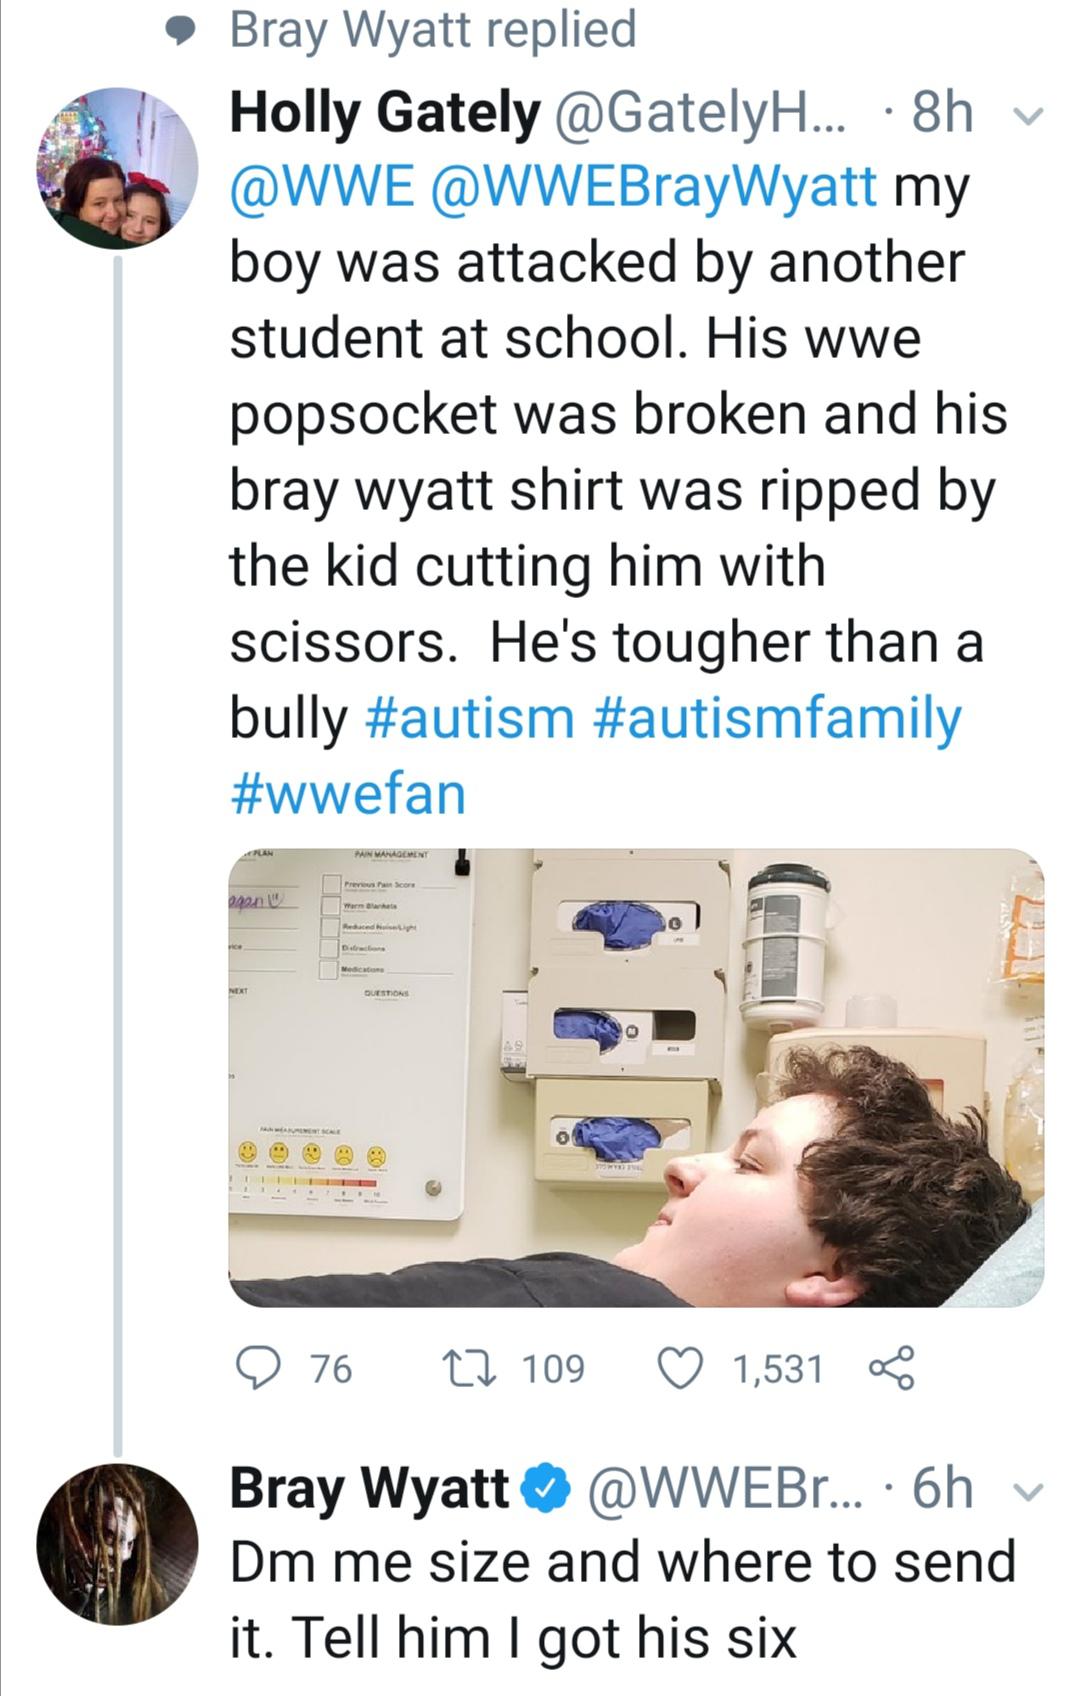 water - Bray Wyatt replied Holly Gately ... 8h v my boy was attacked by another student at school. His wwe popsocket was broken and his bray wyatt shirt was ripped by the kid cutting him with scissors. He's tougher than a bully Pain Management Preus Score